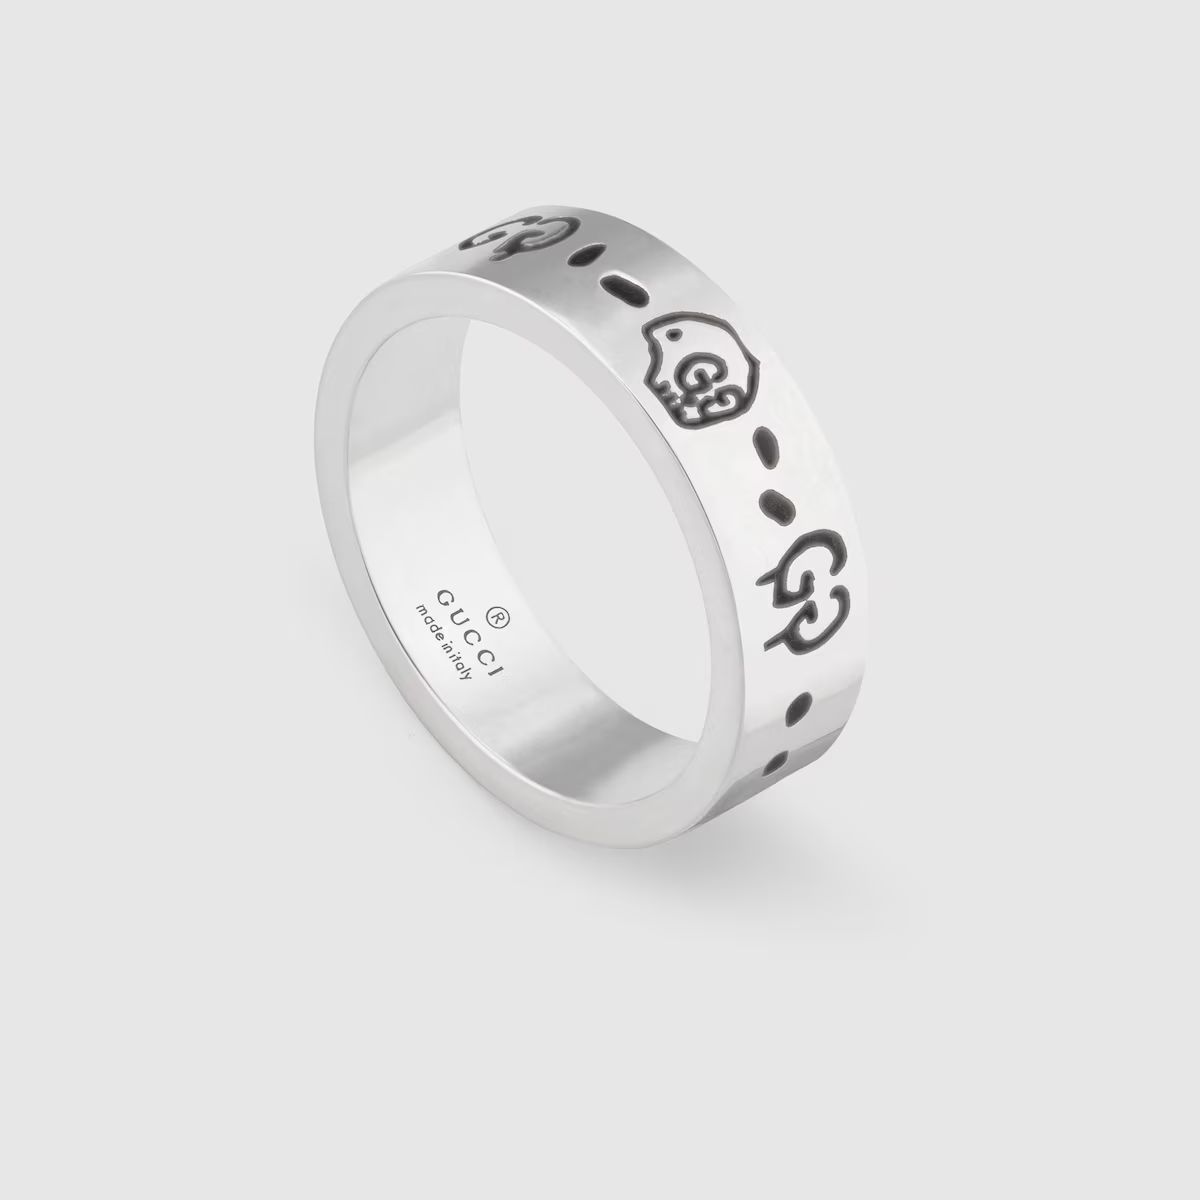 GucciGhost ring in silver | Gucci (US)